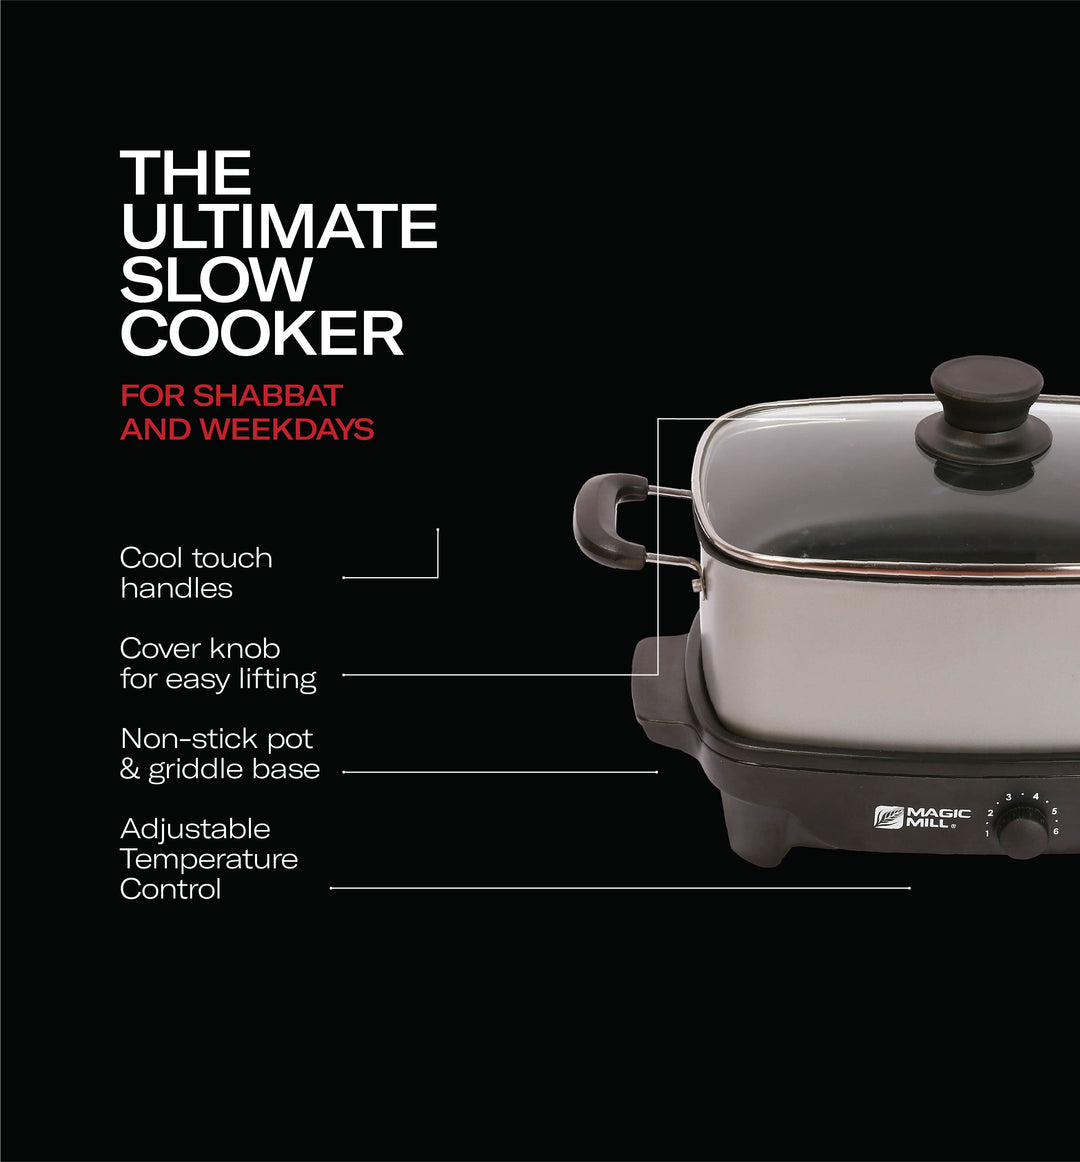 MAGIC MILL DELUXE 10 QT GRAY SLOW COOKER WITH FLAT GLASS COVER AND COO –  Royaluxkitchen